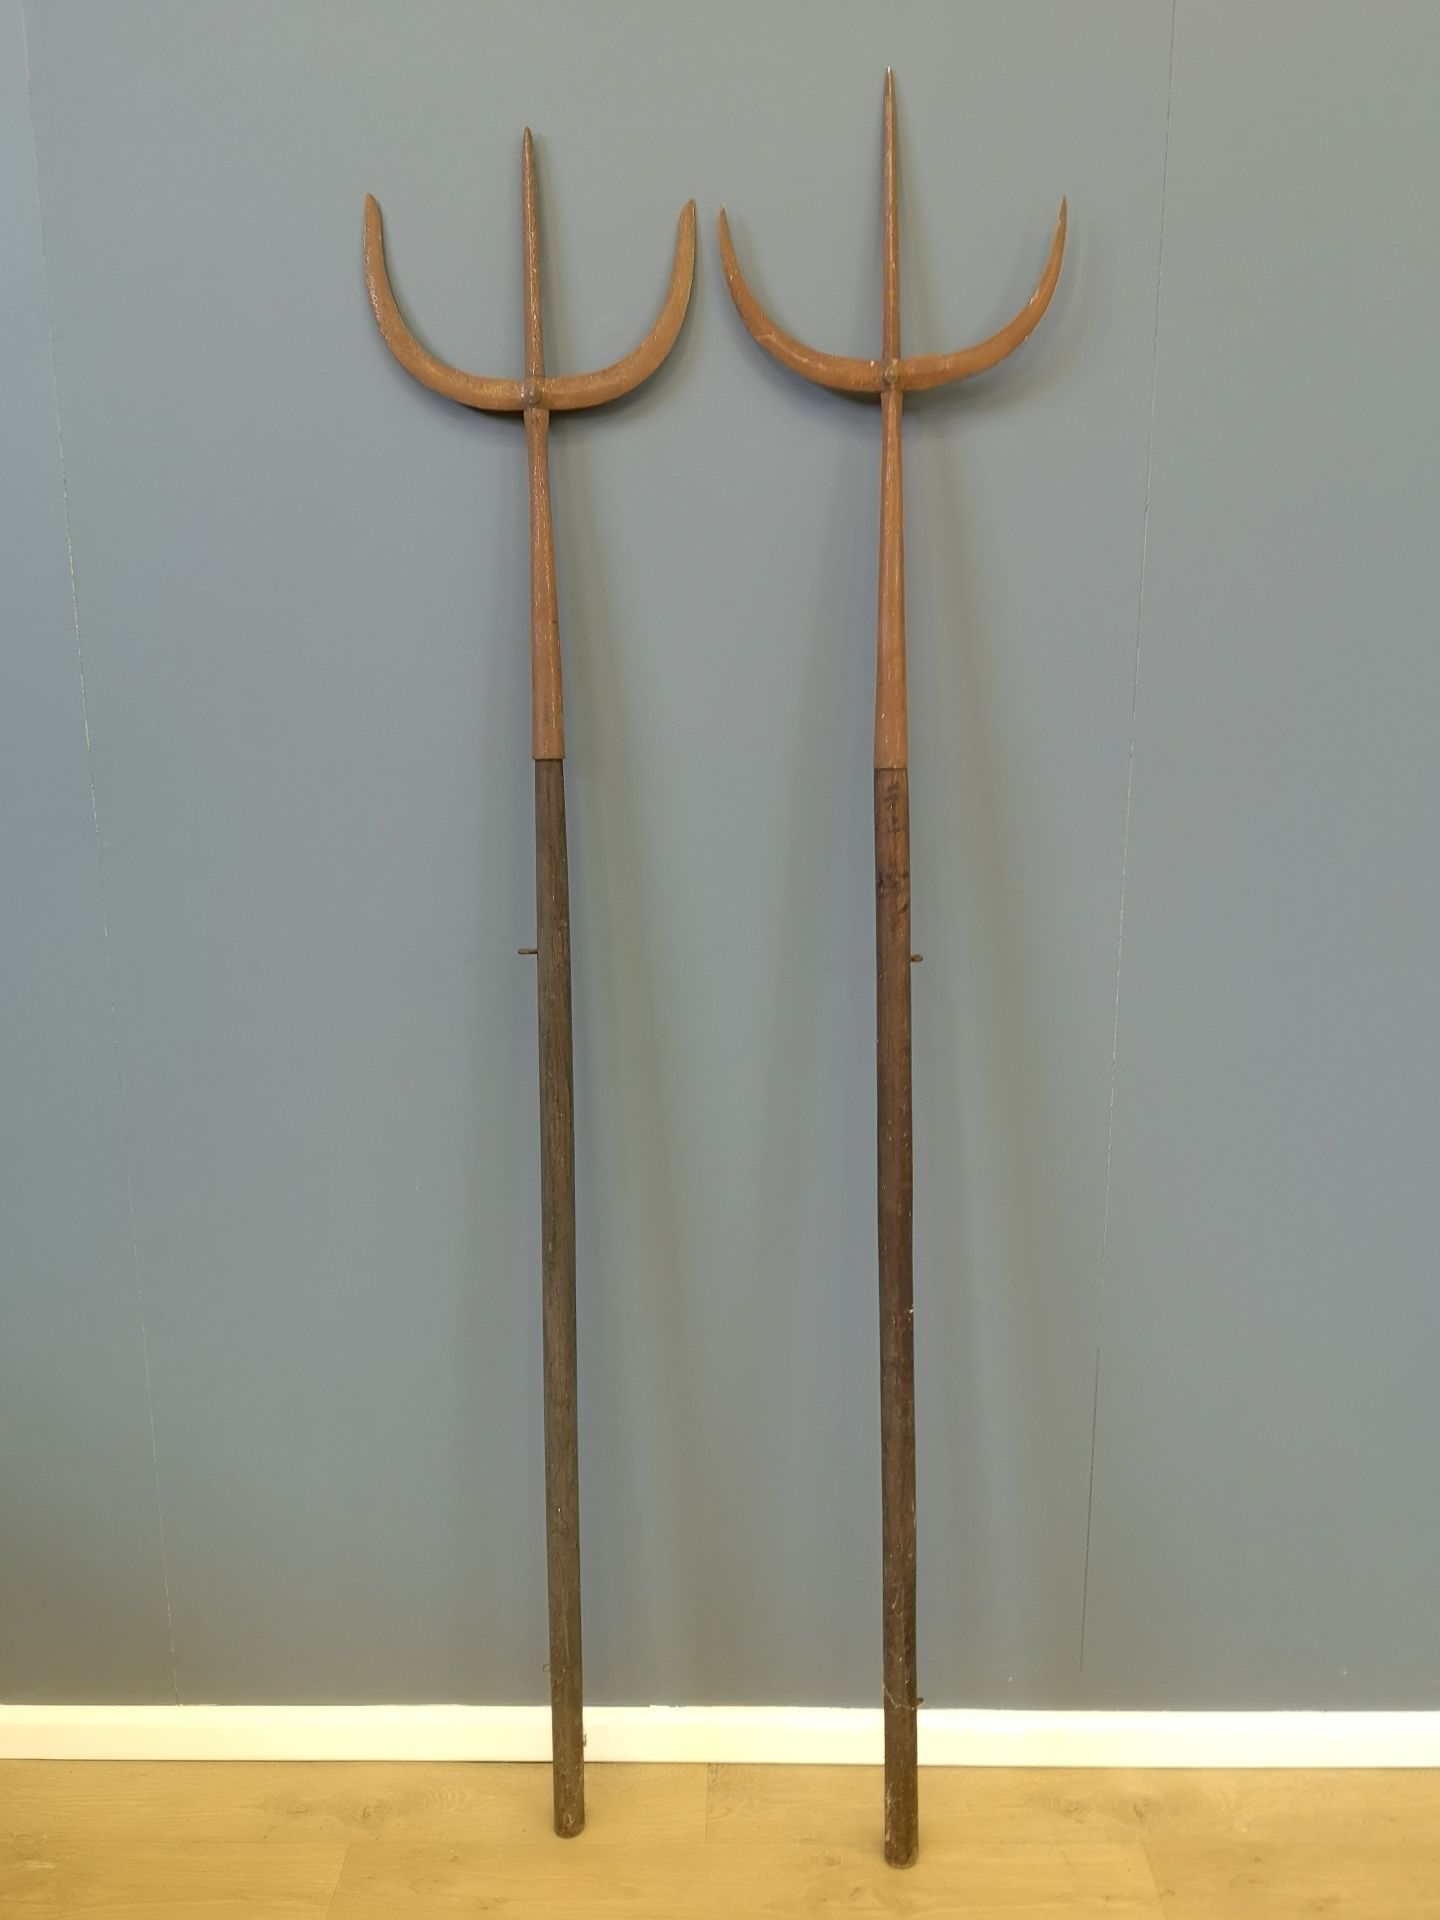 Two wood tridents with metal forks